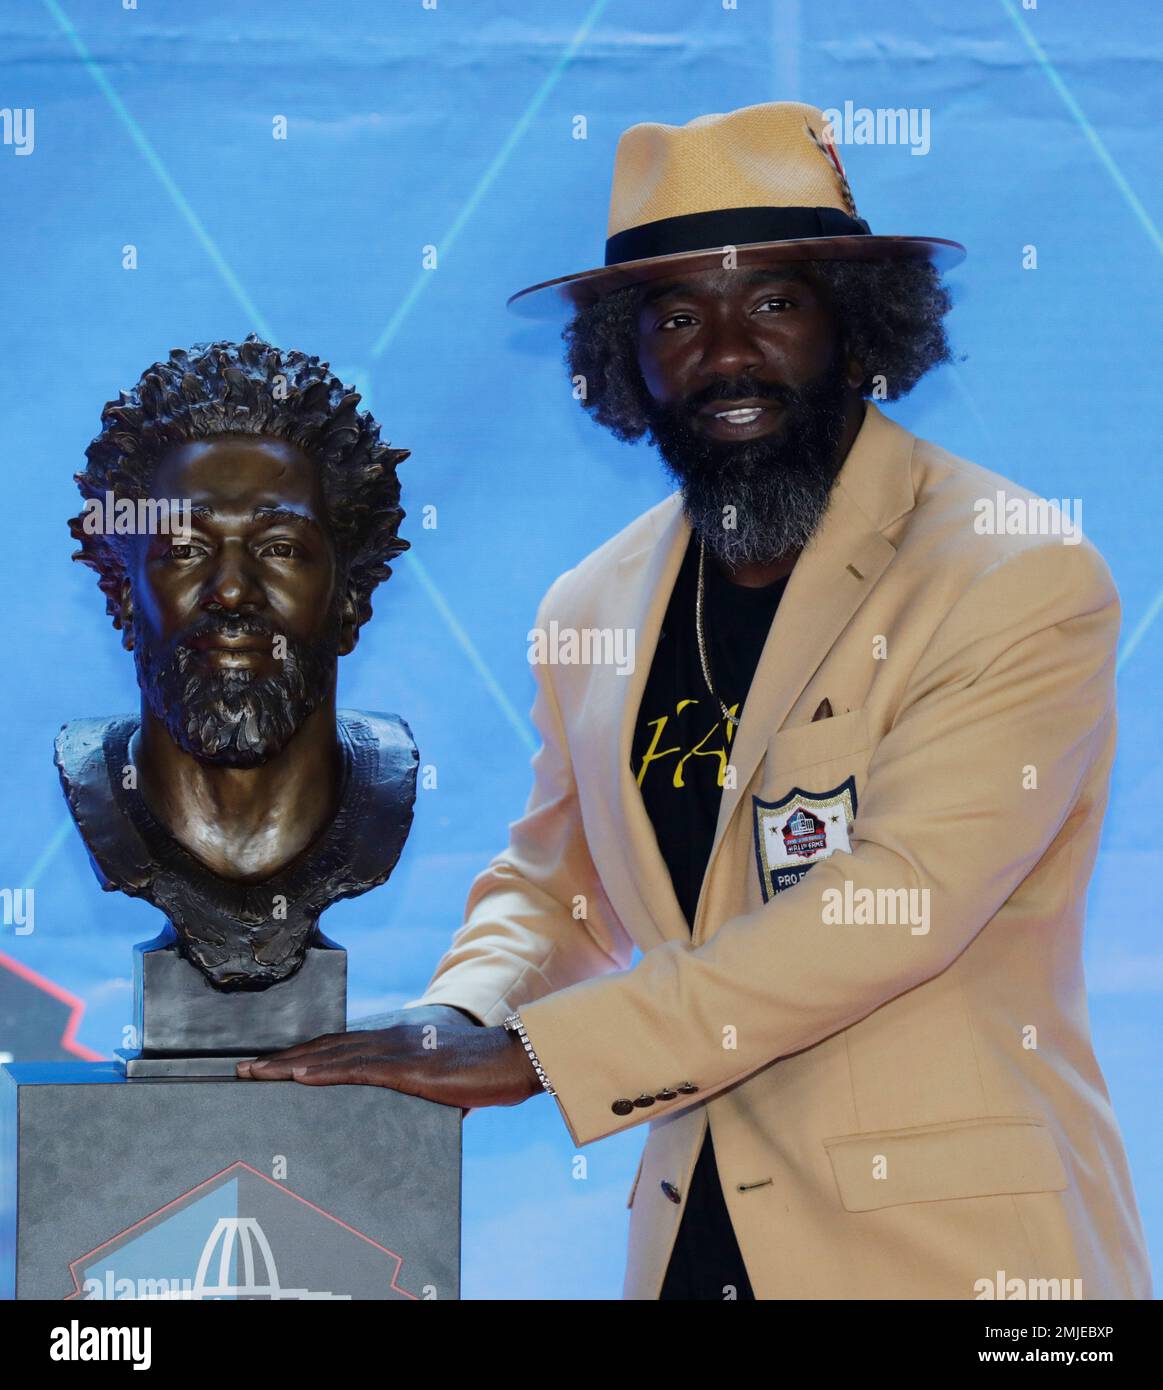 Former NFL player Ed Reed poses with a bust of himself during the induction  ceremony at the Pro Football Hall of Fame, Saturday, Aug. 3, 2019, in  Canton, Ohio. (AP Photo/Ron Schwane